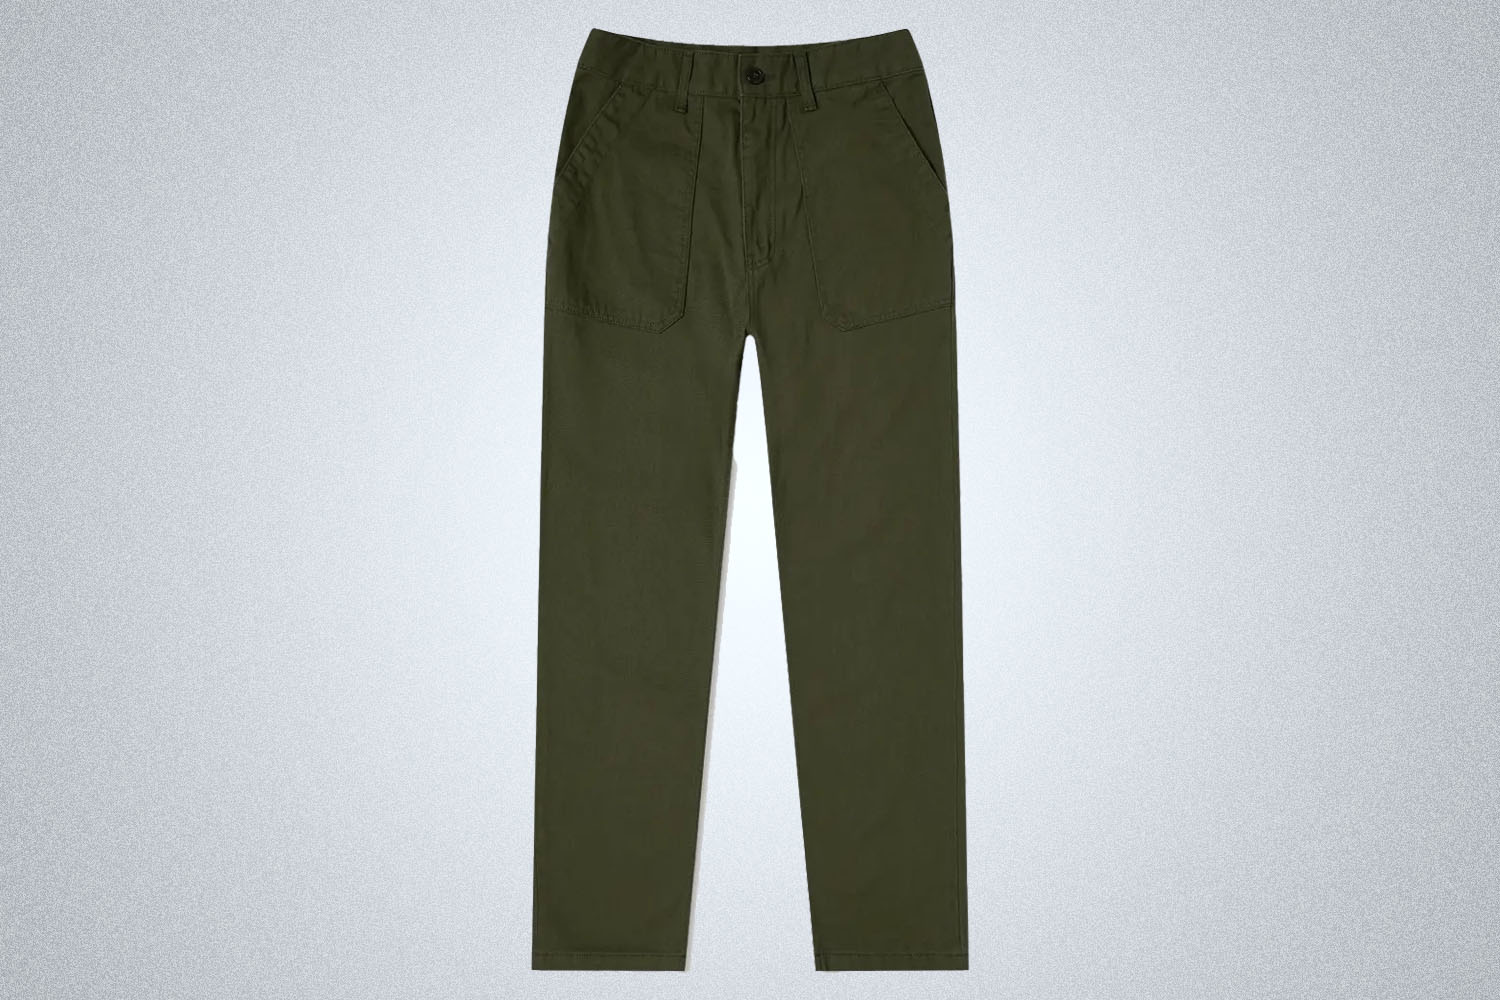 A pair of green fatigue pants from End. Clothing on a grey background